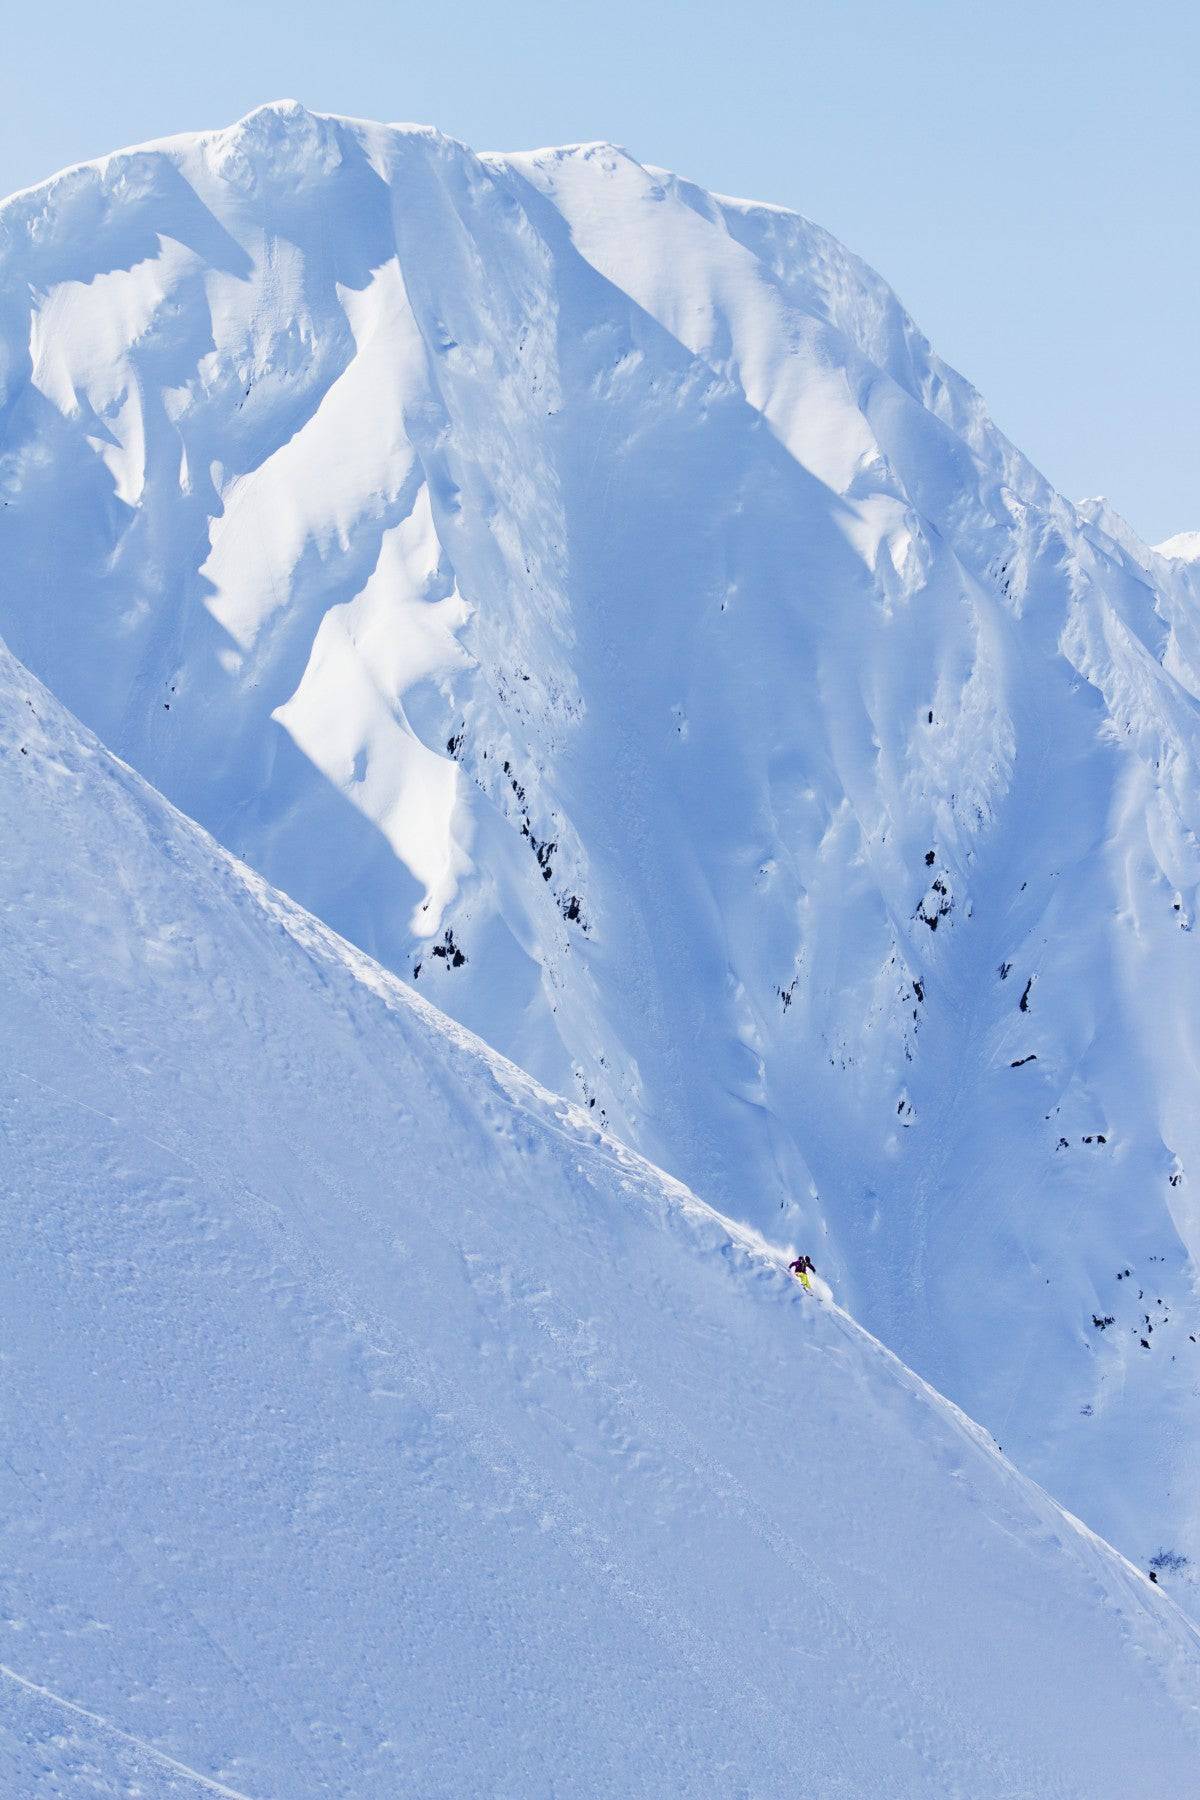 Backcountry Skiing In The Chugach Mountains, United States Of America - Powderaddicts